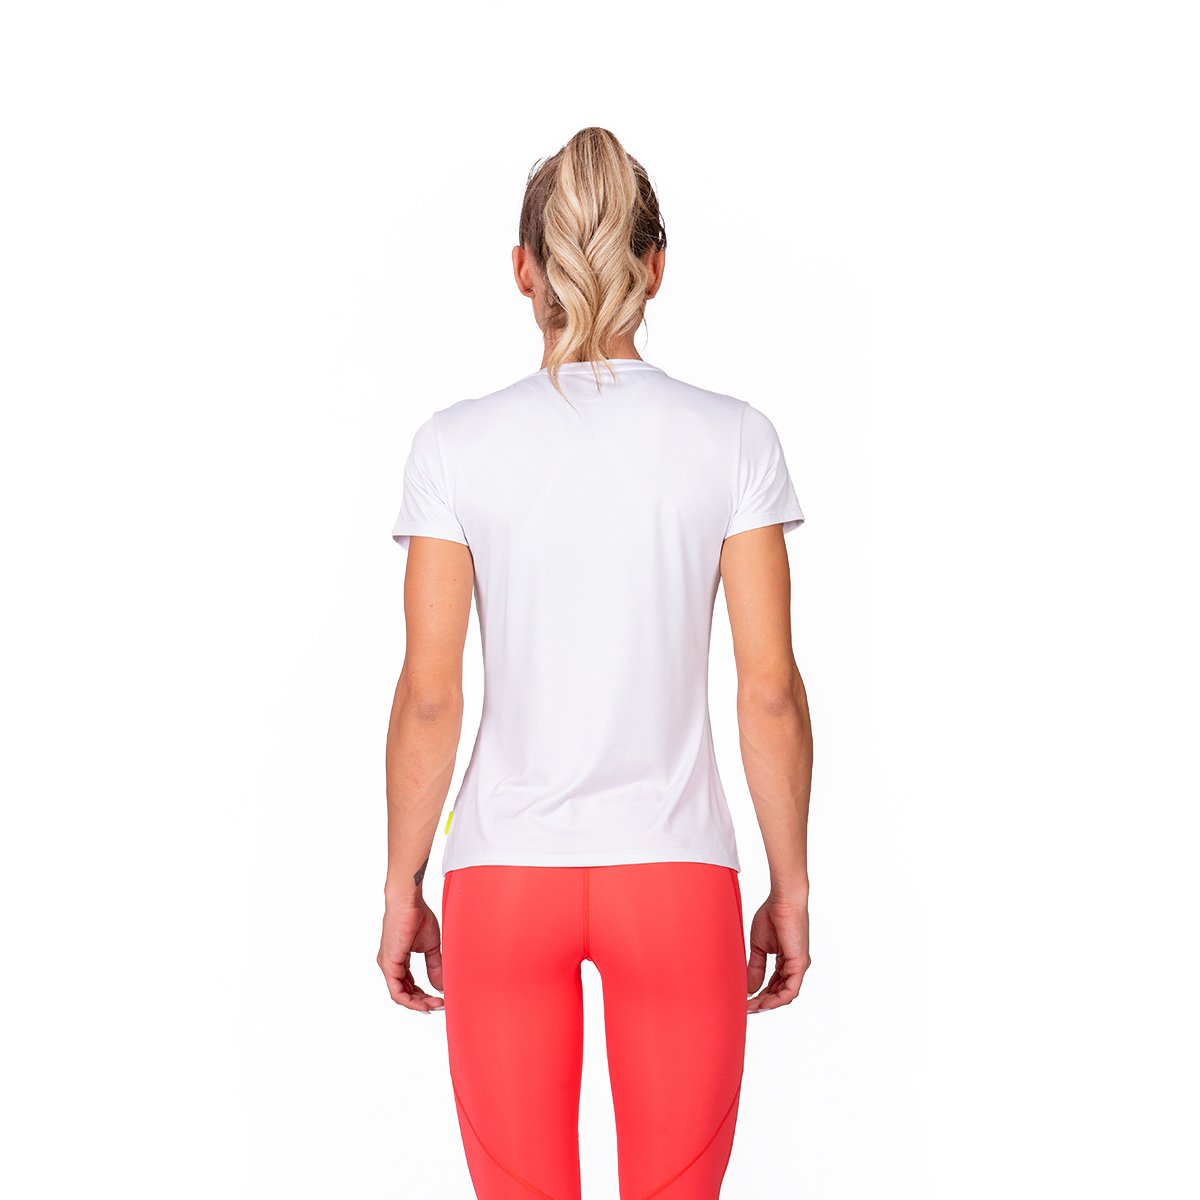 Activewear 110PRCNT Tight-Fit T-Shirt for Women